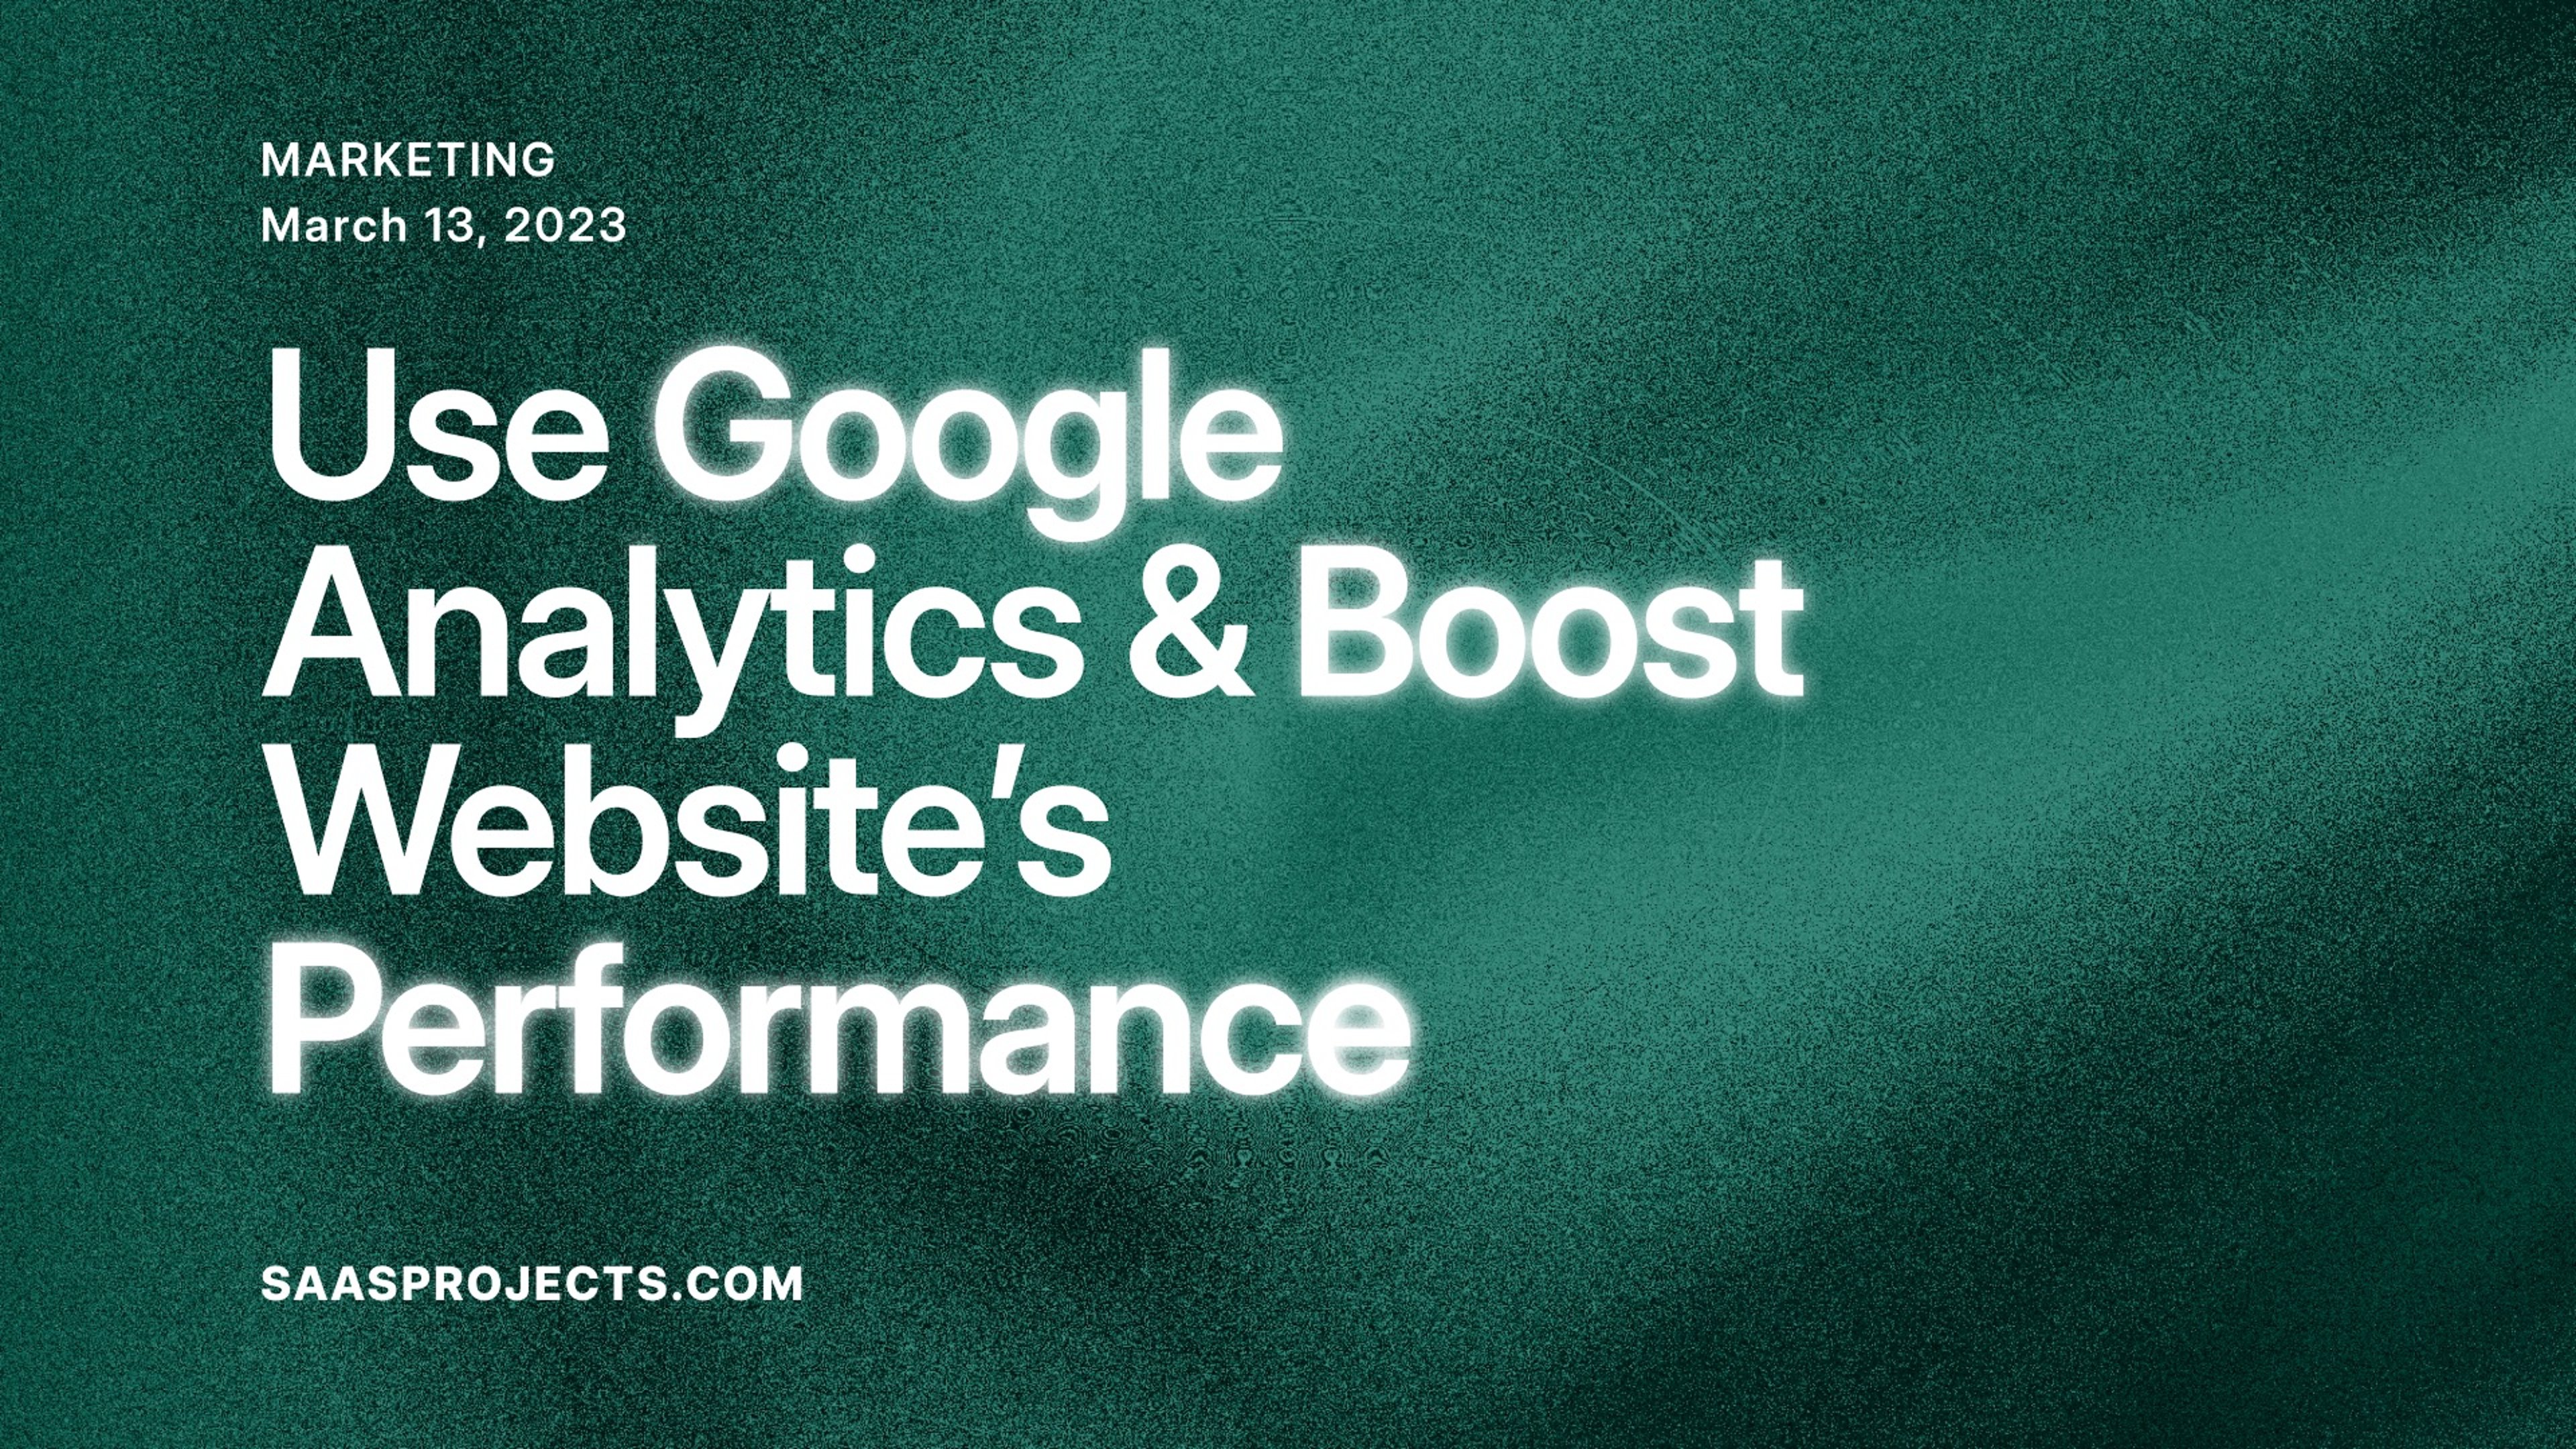 Use Google Analytics and boost your website's performance.